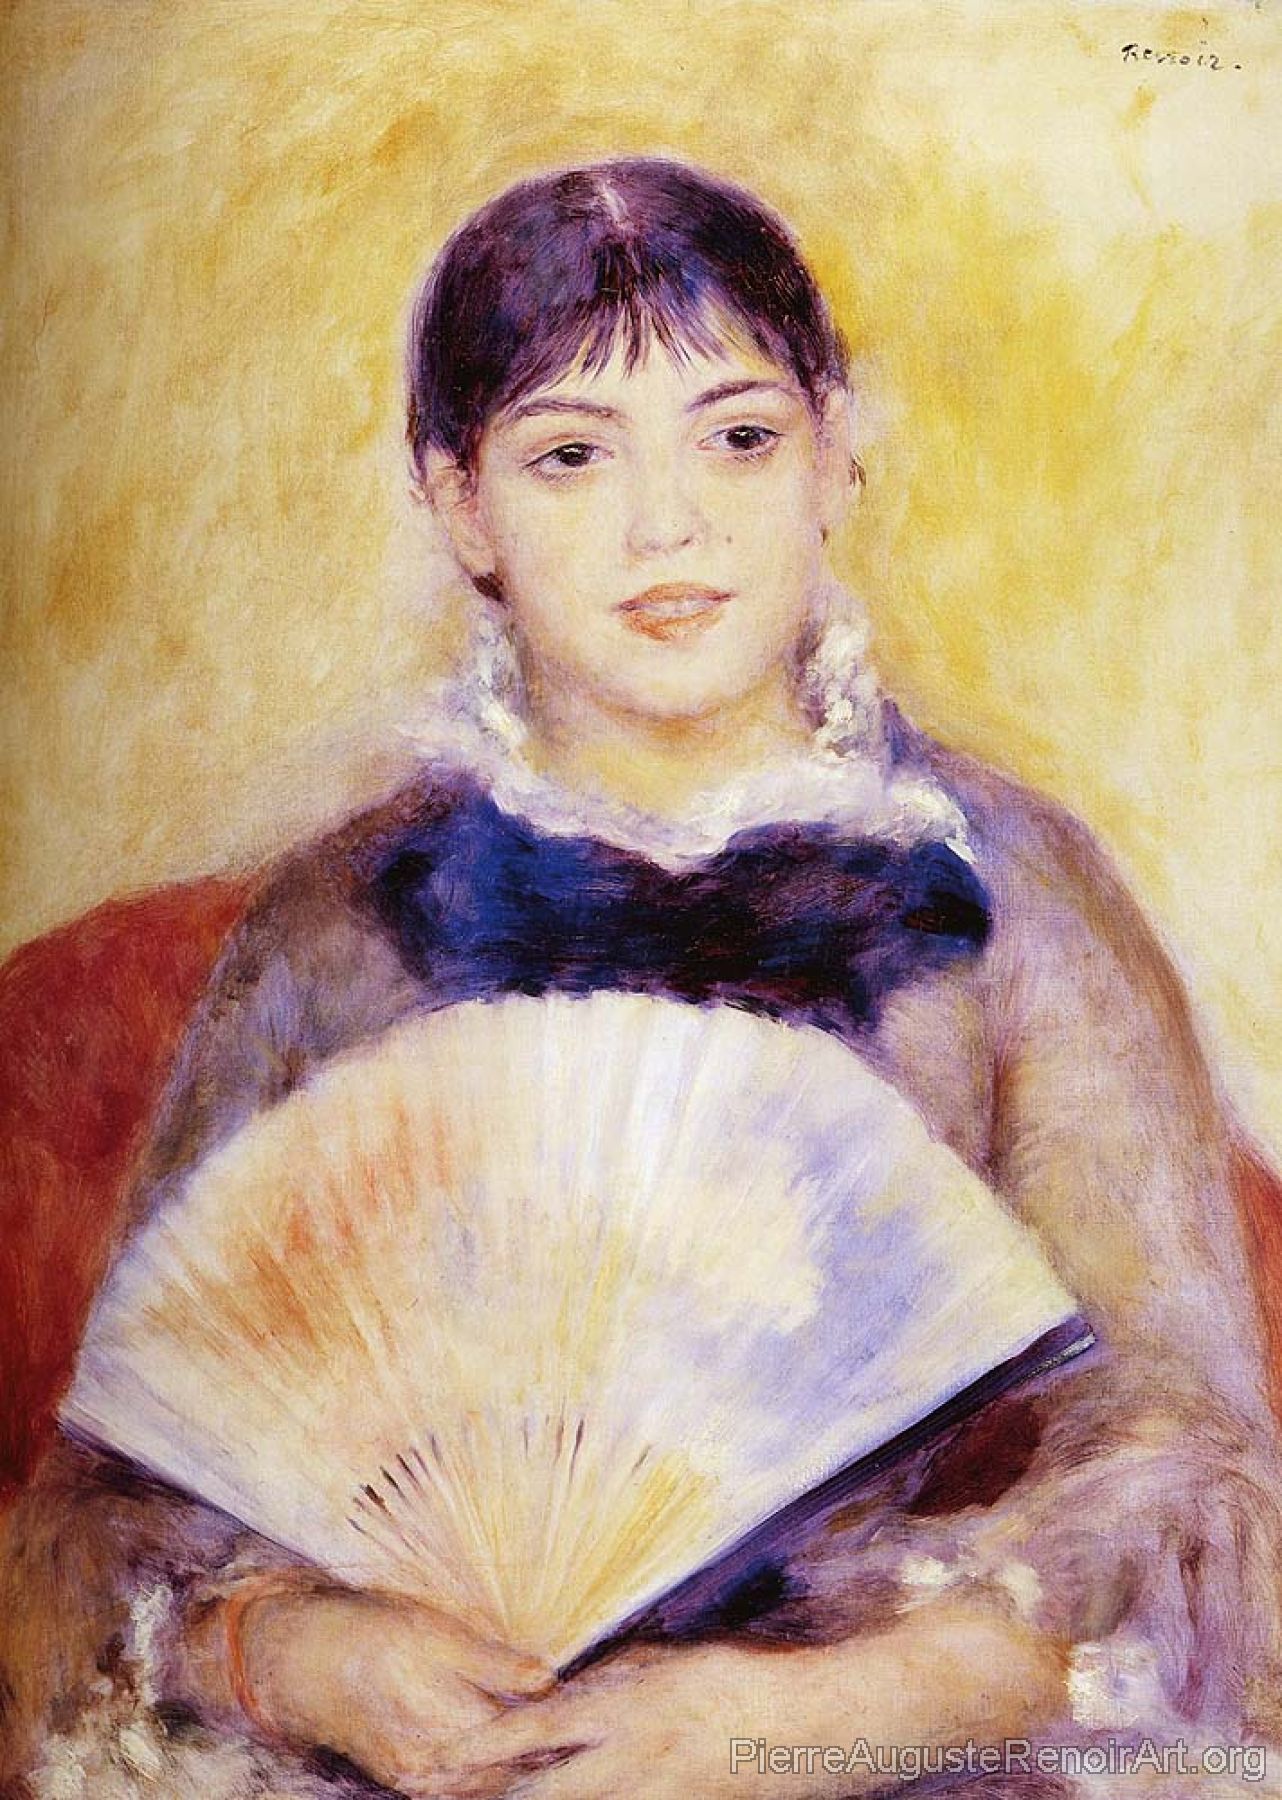 Girl with a Fan